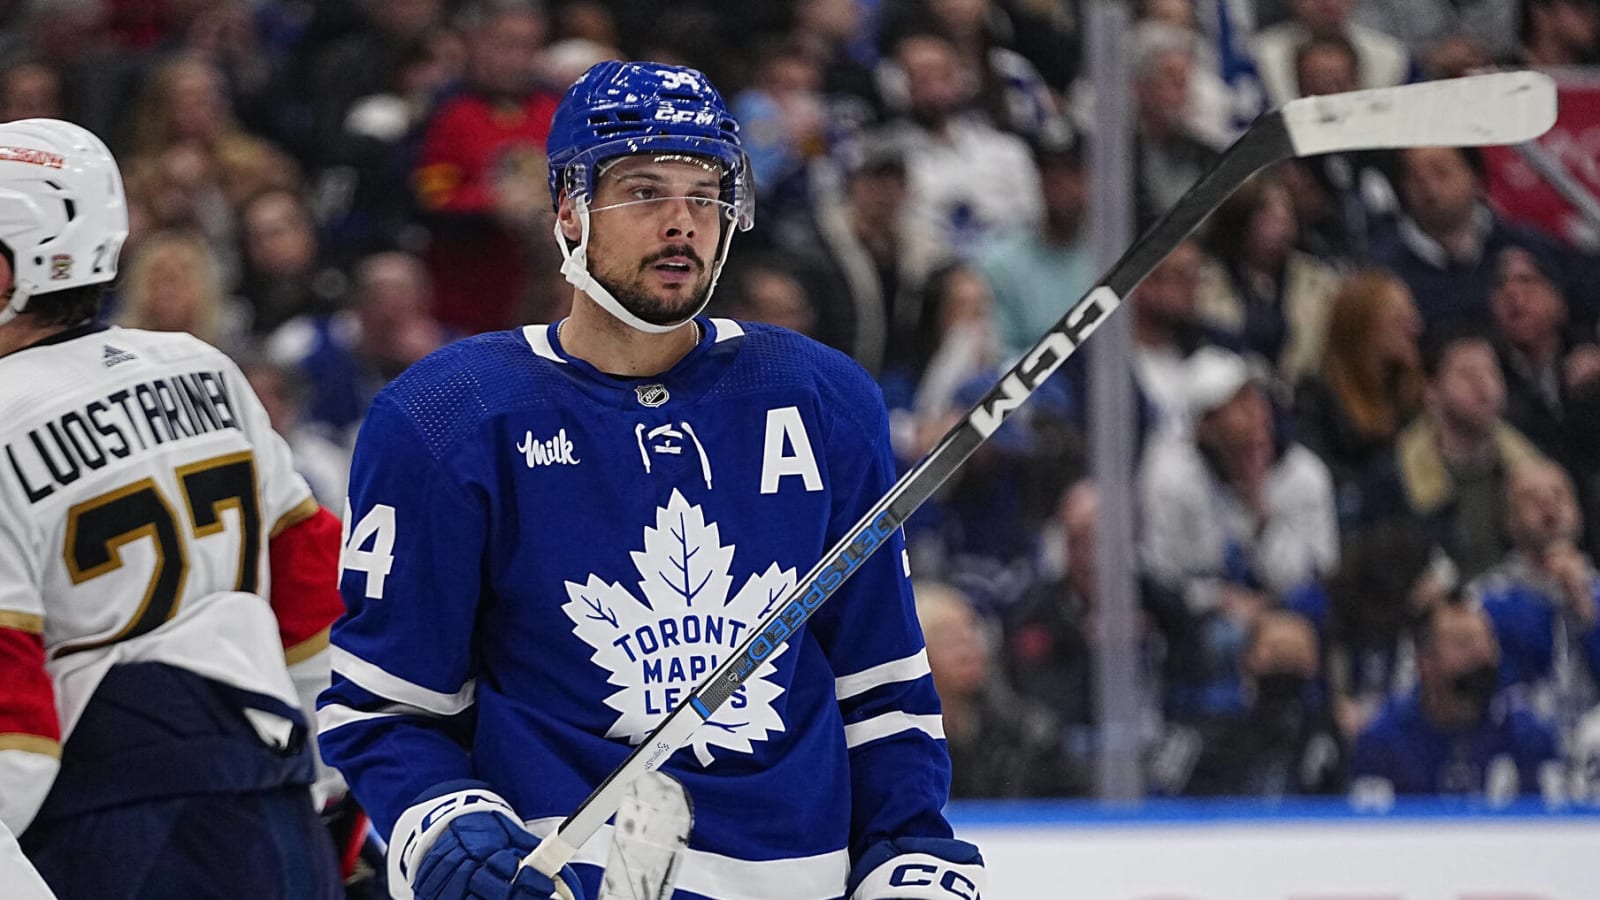 Could Maple Leafs sign two players to potentially replace Auston Matthews?